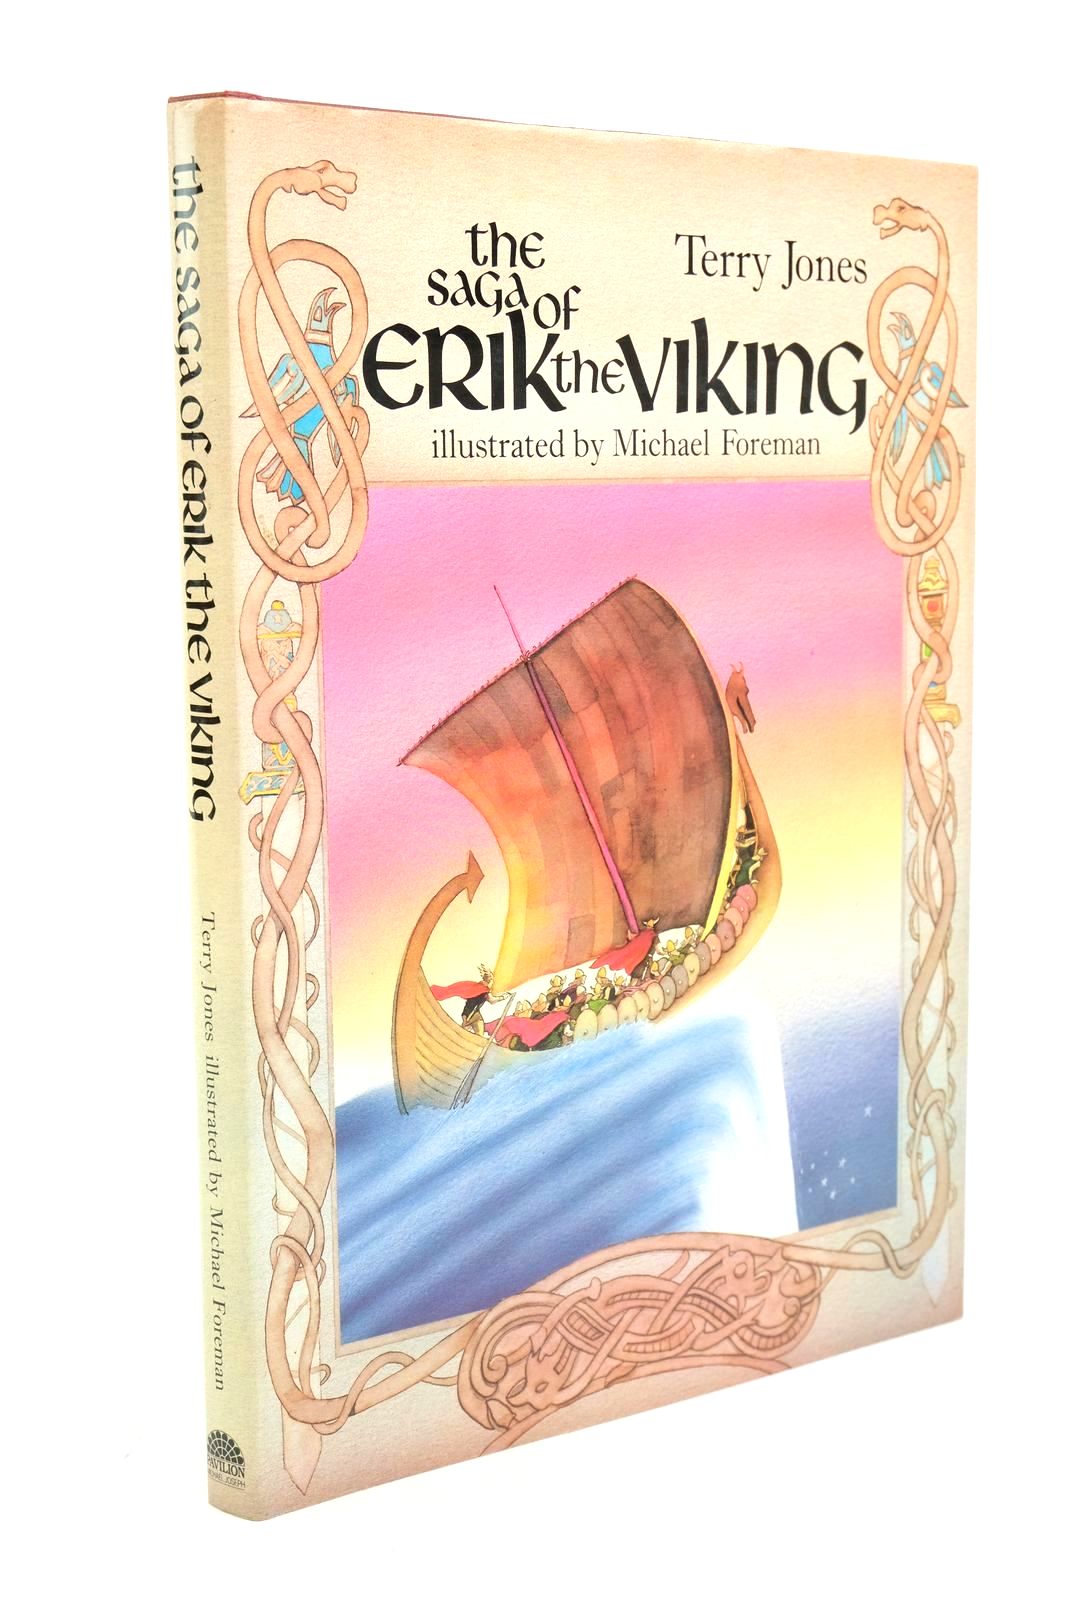 Photo of THE SAGA OF ERIK THE VIKING written by Jones, Terry illustrated by Foreman, Michael published by Pavilion Books Ltd. (STOCK CODE: 1323080)  for sale by Stella & Rose's Books